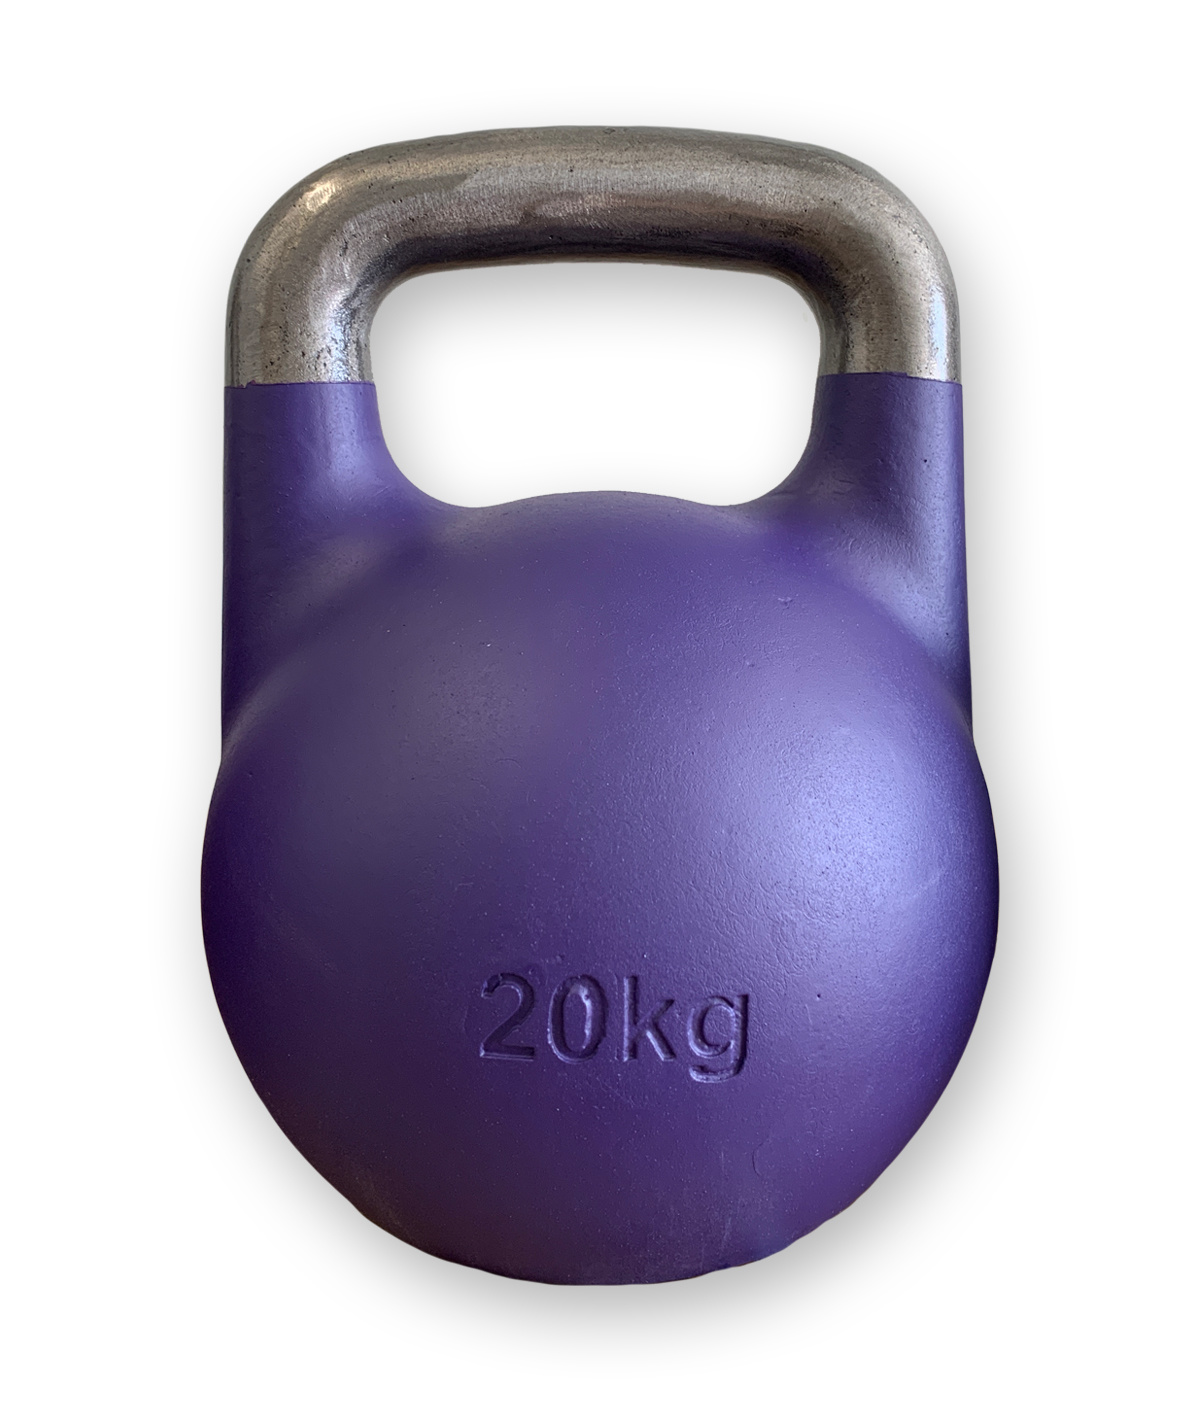 Competition kettlebell 20 kg staal - competitie kettlebell